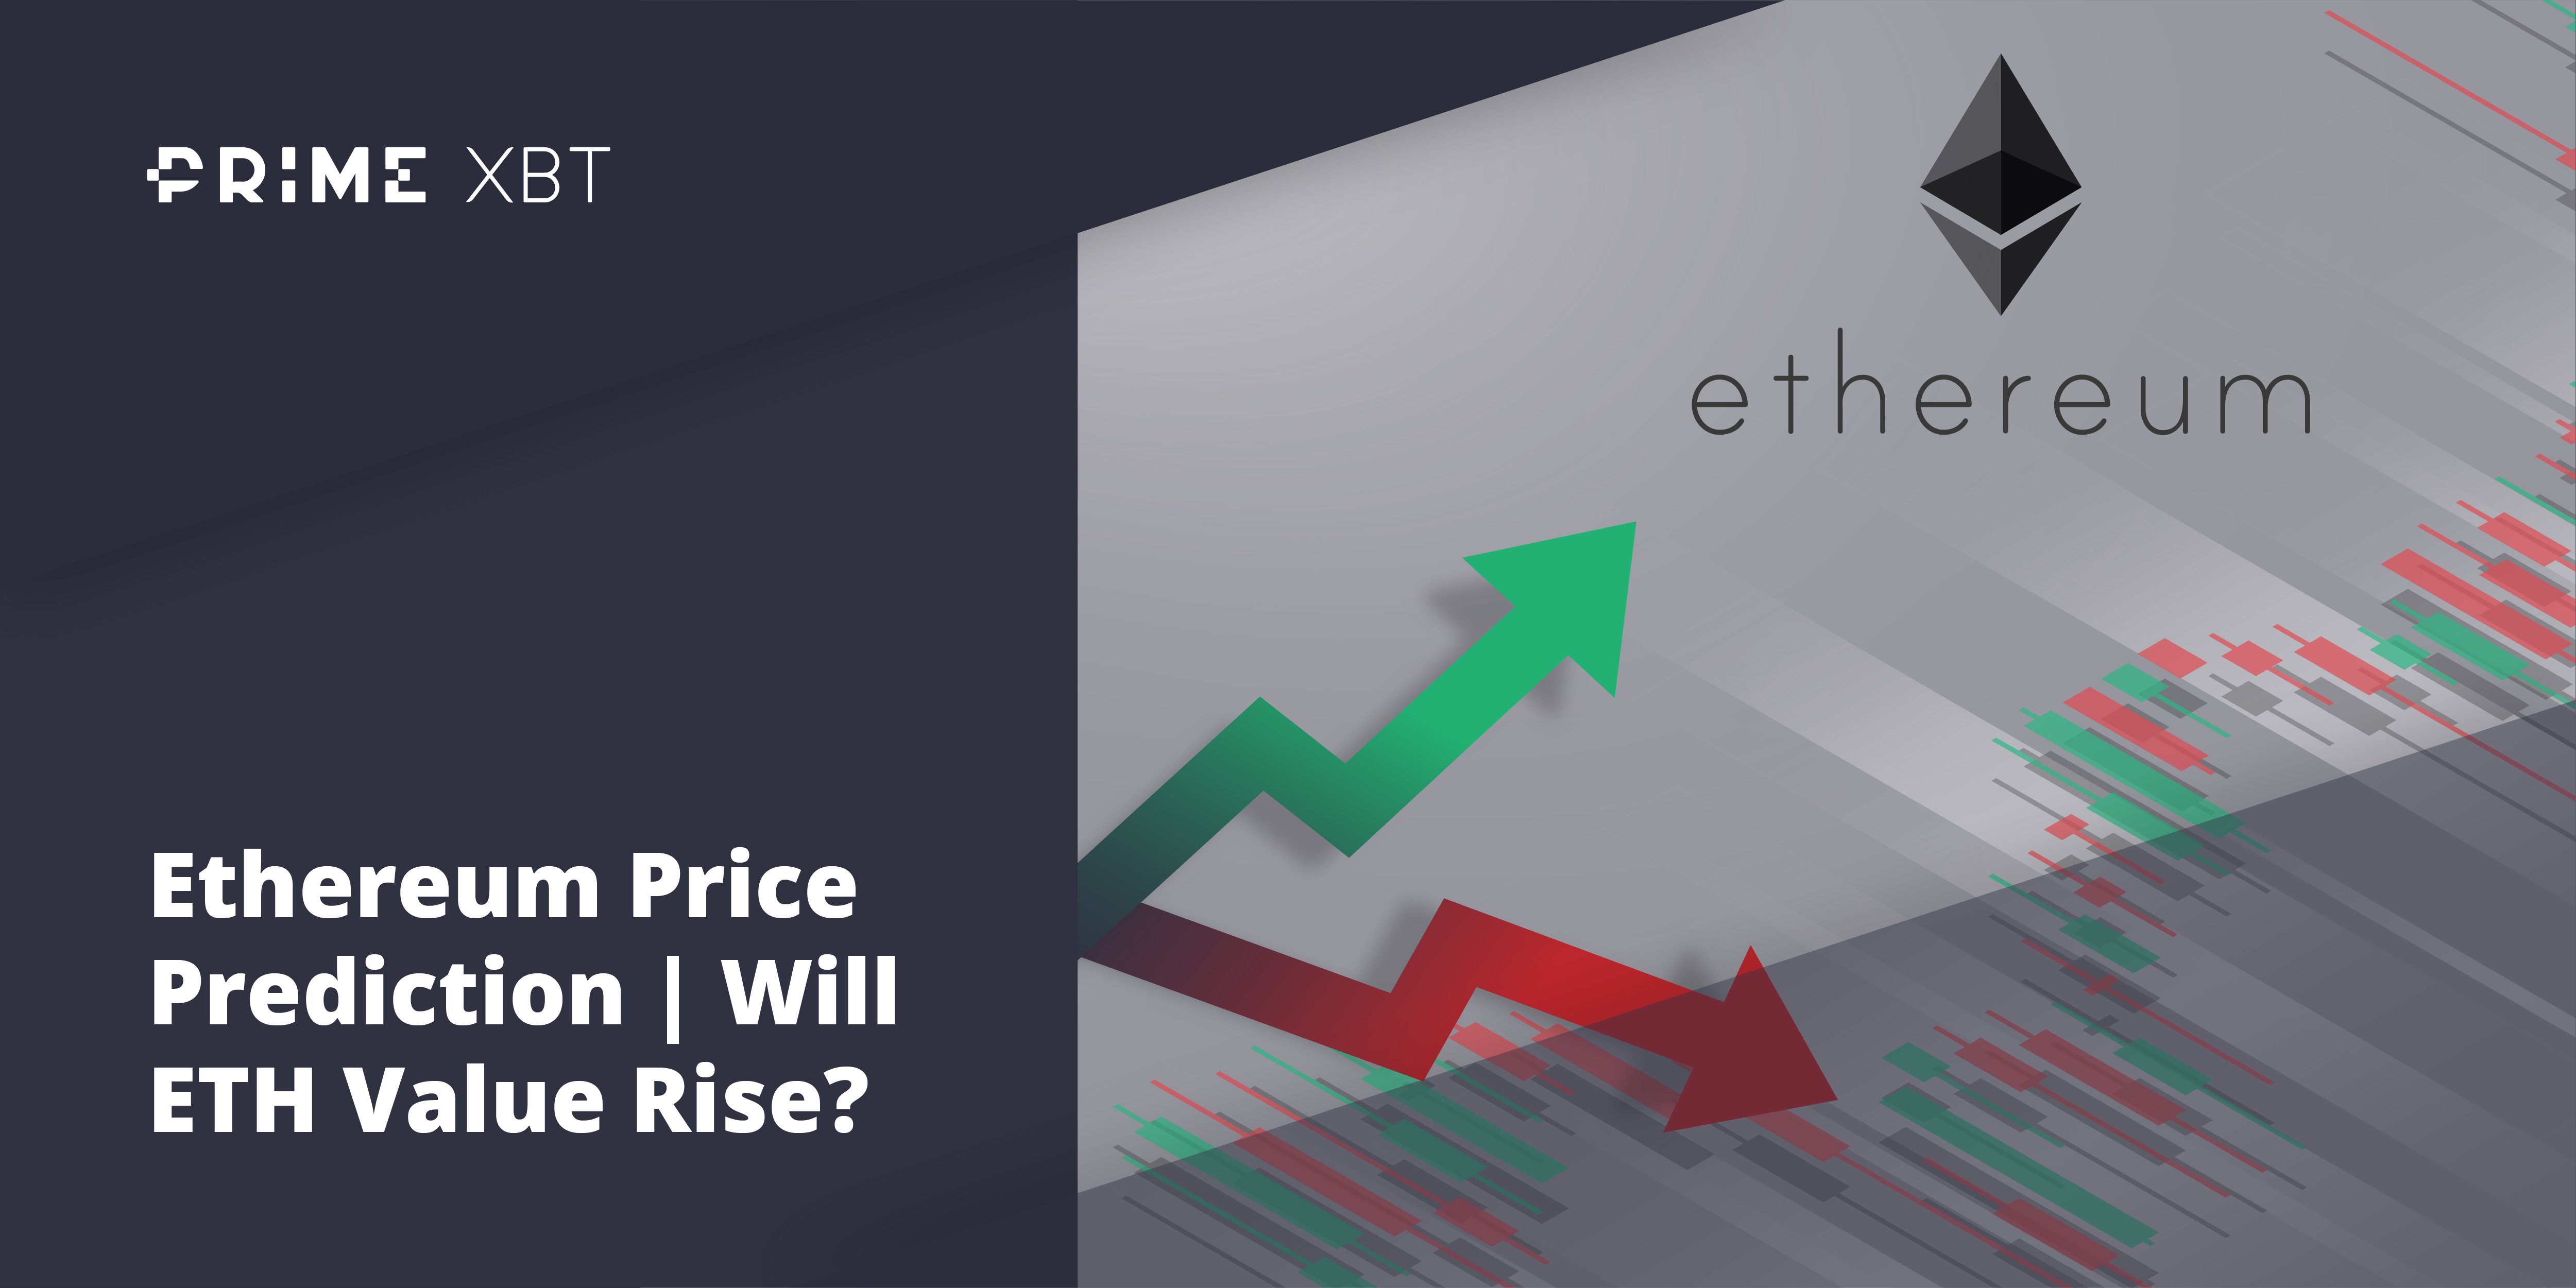 Ethereum Price Prediction: What will happen to the price of ETH after The Merge? - eth